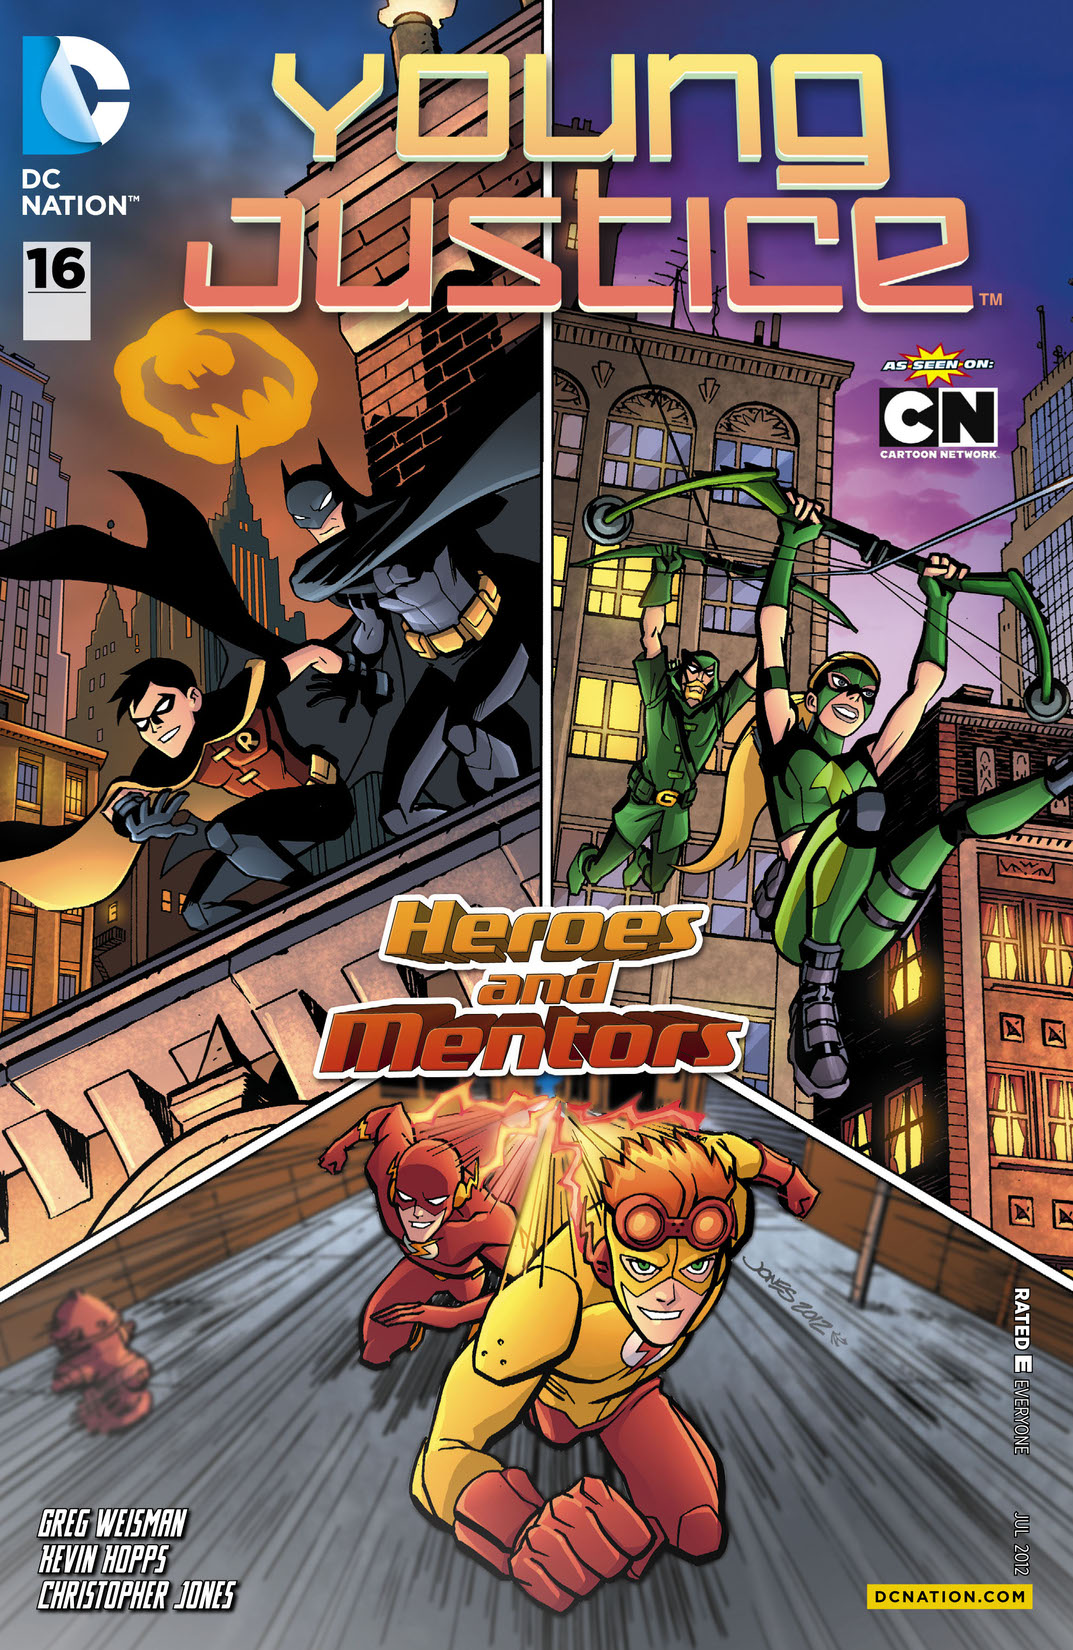 Young Justice (2011-2013) #16 preview images